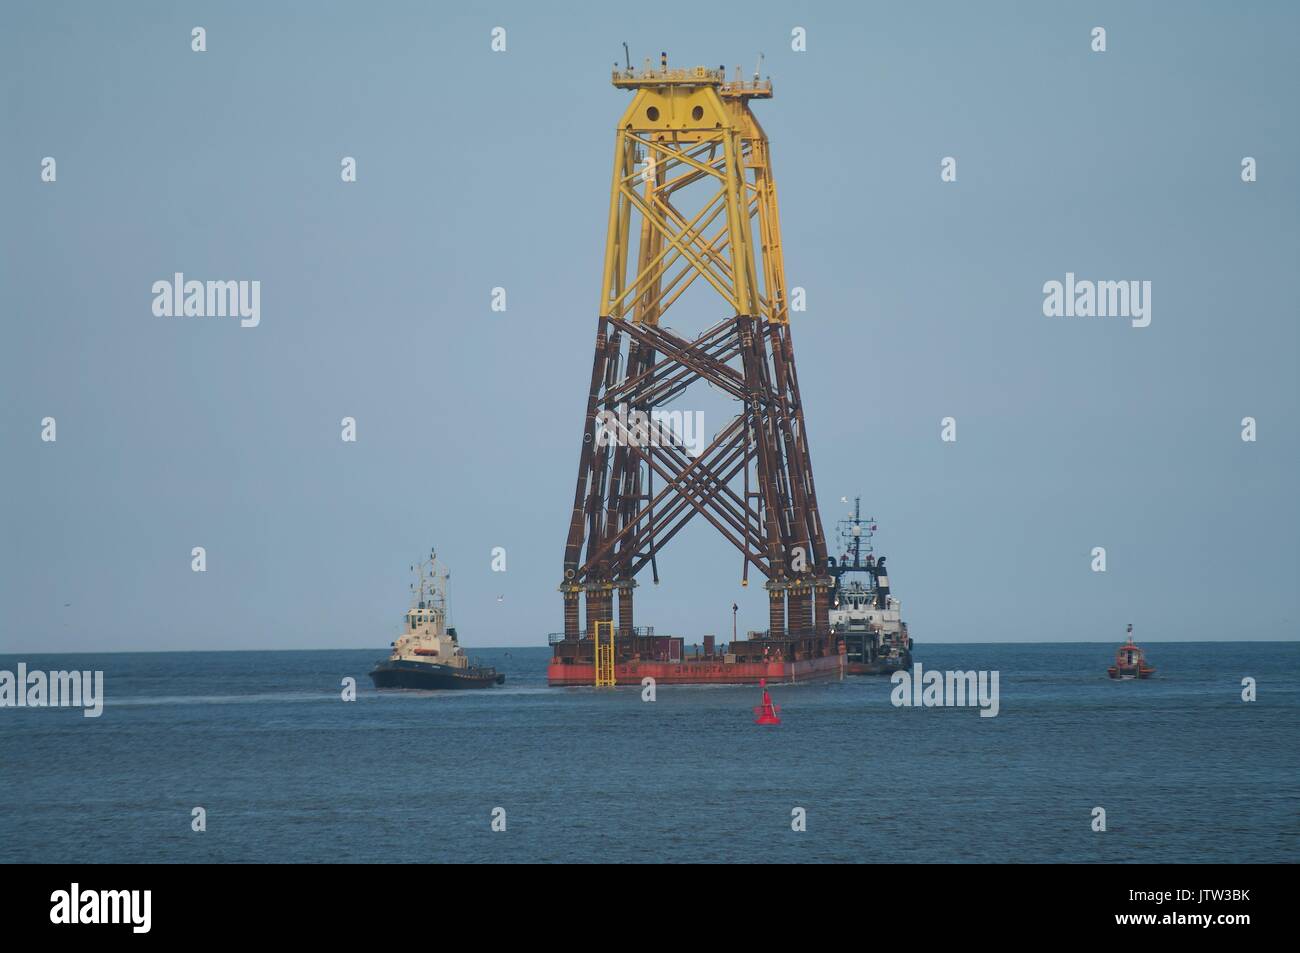 River Tyne, South Shields, UK, 10th August 2017. Wind turbine foundations at the mouth of the River Tyne on their way to the Beatrice offshore wind farm in the Moray Firth. Due to their height National Grid had to raise the height of power cables across the River Tyne despite the pylons being two of the highest in Britain, surpassed only by sets spanning the River Thames near London and the River Severn in Bristol. Credit: Colin Edwards/Alamy Live News. Stock Photo